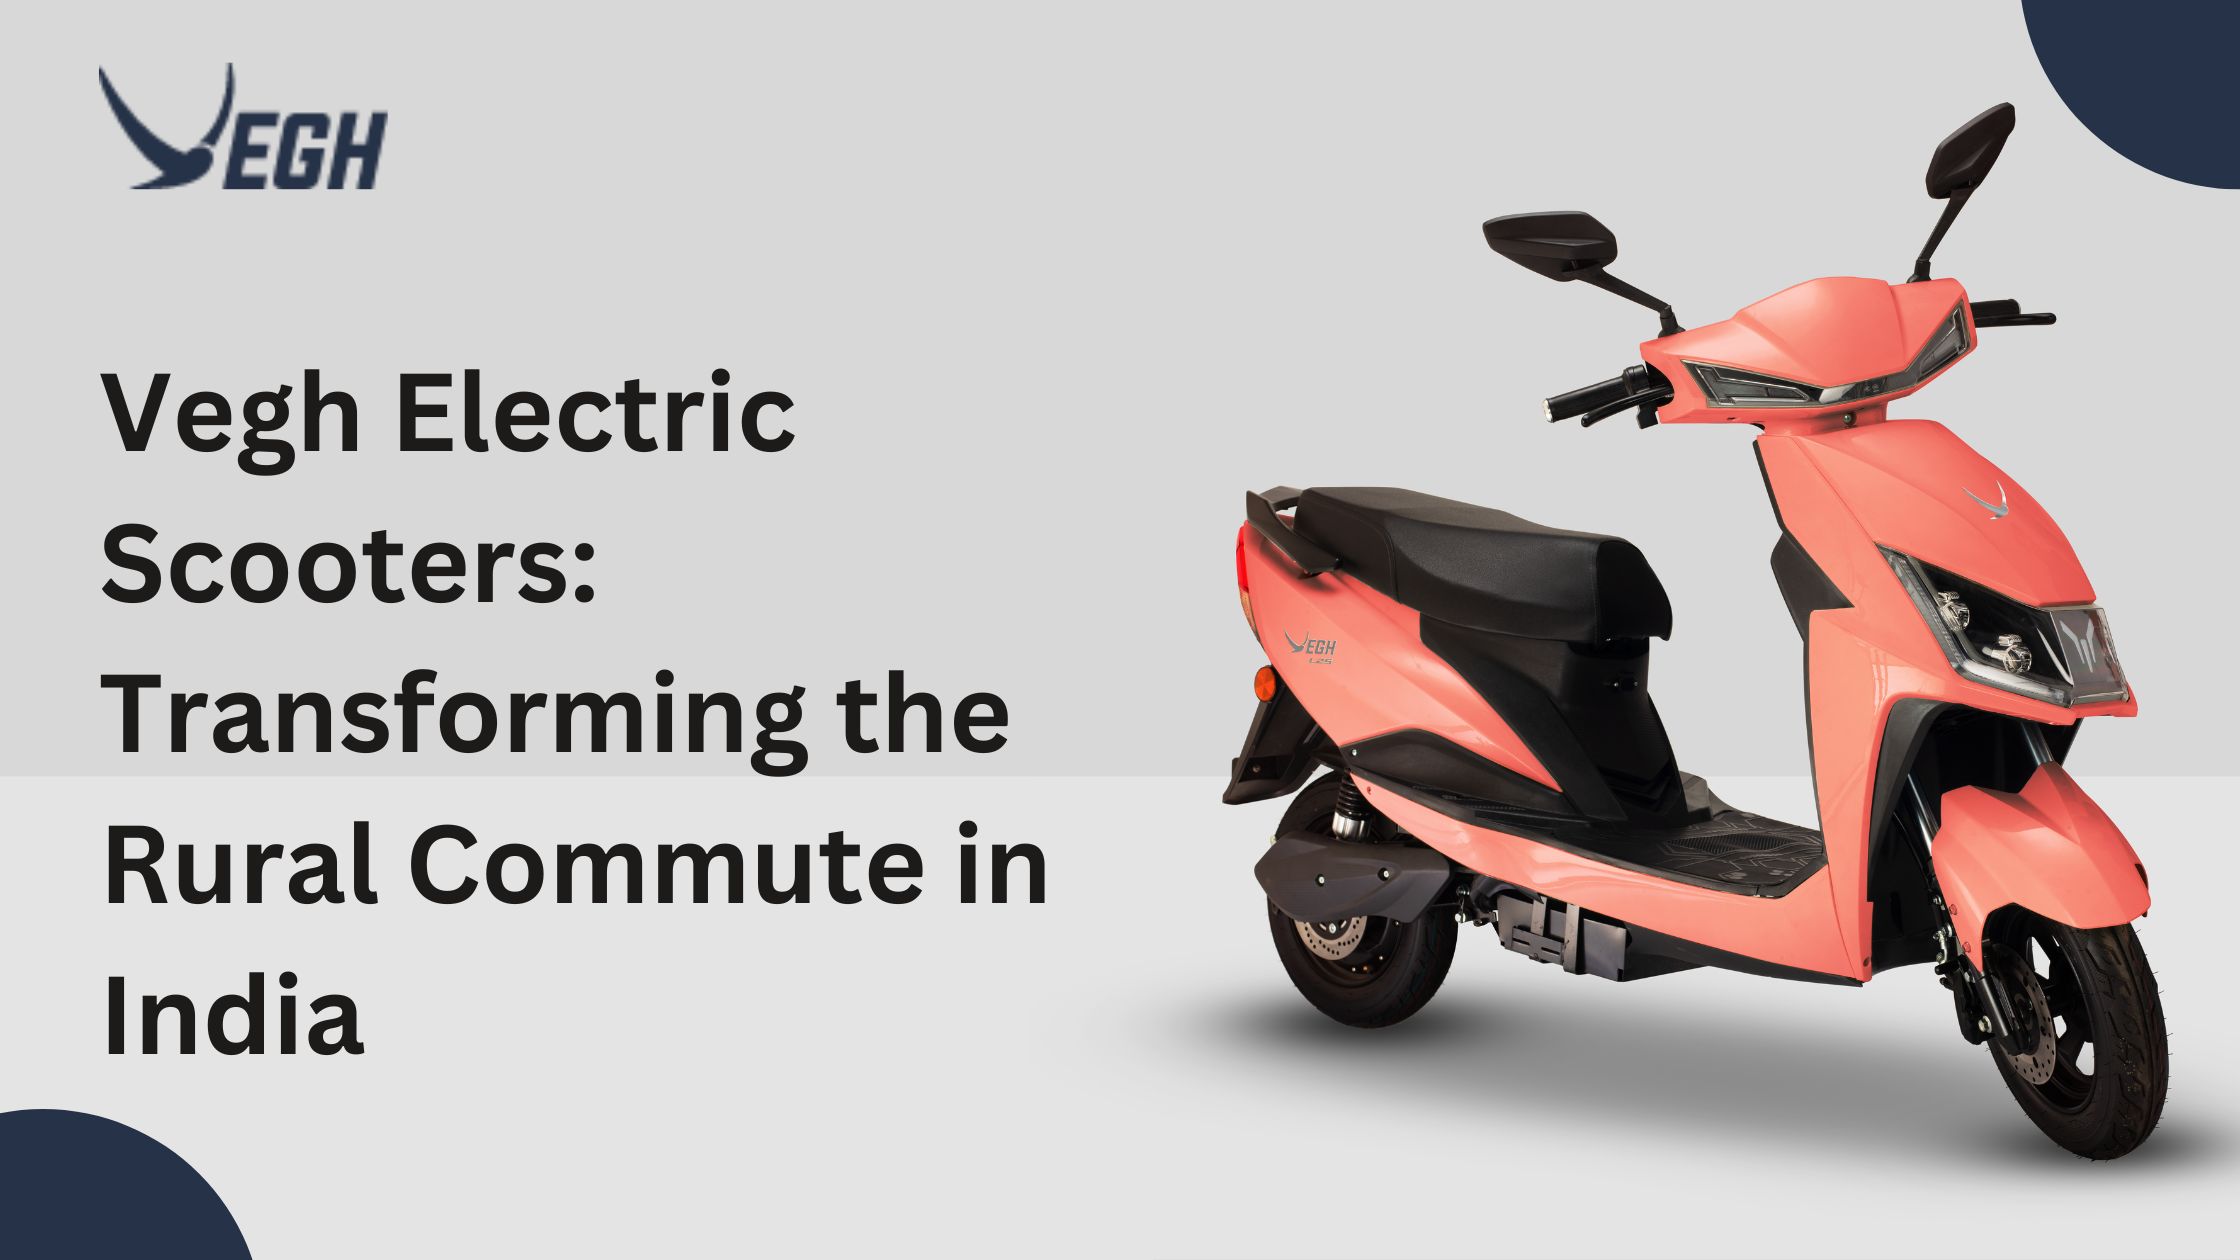 Vegh electric scooters: Transforming the Rural Commute in India